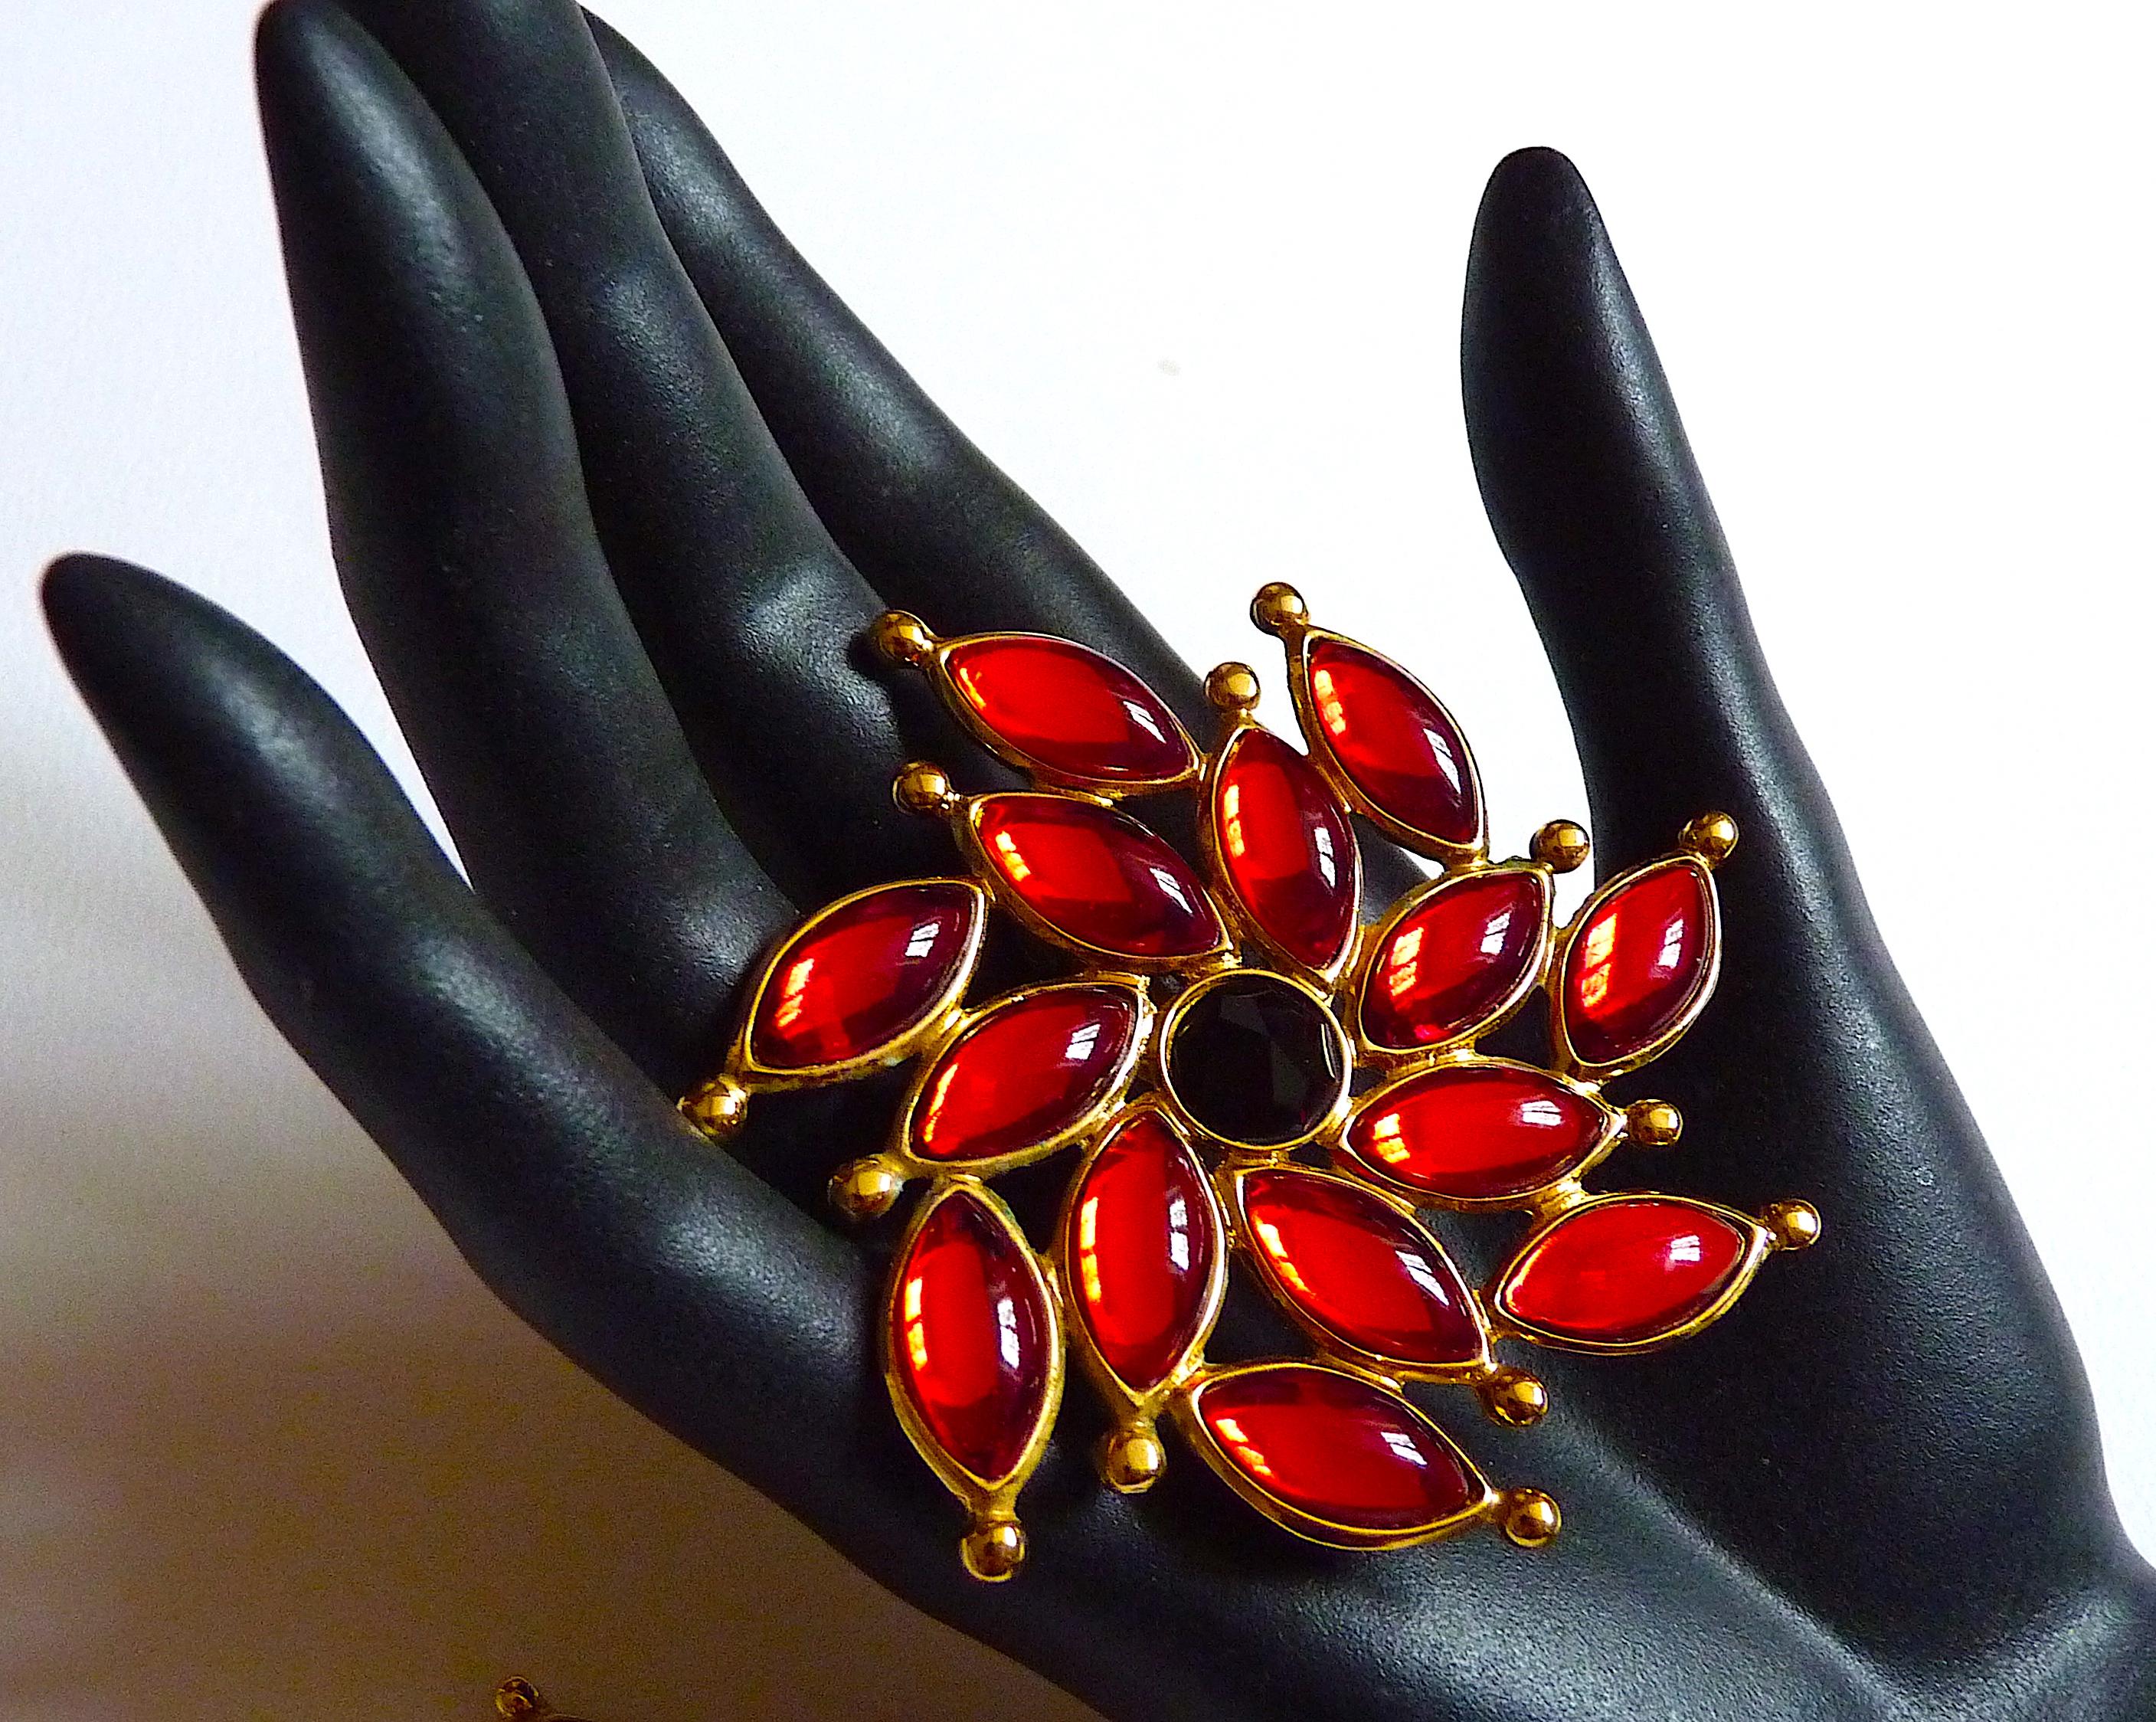 YSL PARIS by Robert Goossens Oversized Red Flower Clip On Earrings adorned with black Central and Red Cabochons on Gold Tone Metal, Vintage from the 1980s. 

Stamped YSL at back of each clip, and Made in France at back of one clip

CONDITION : Very